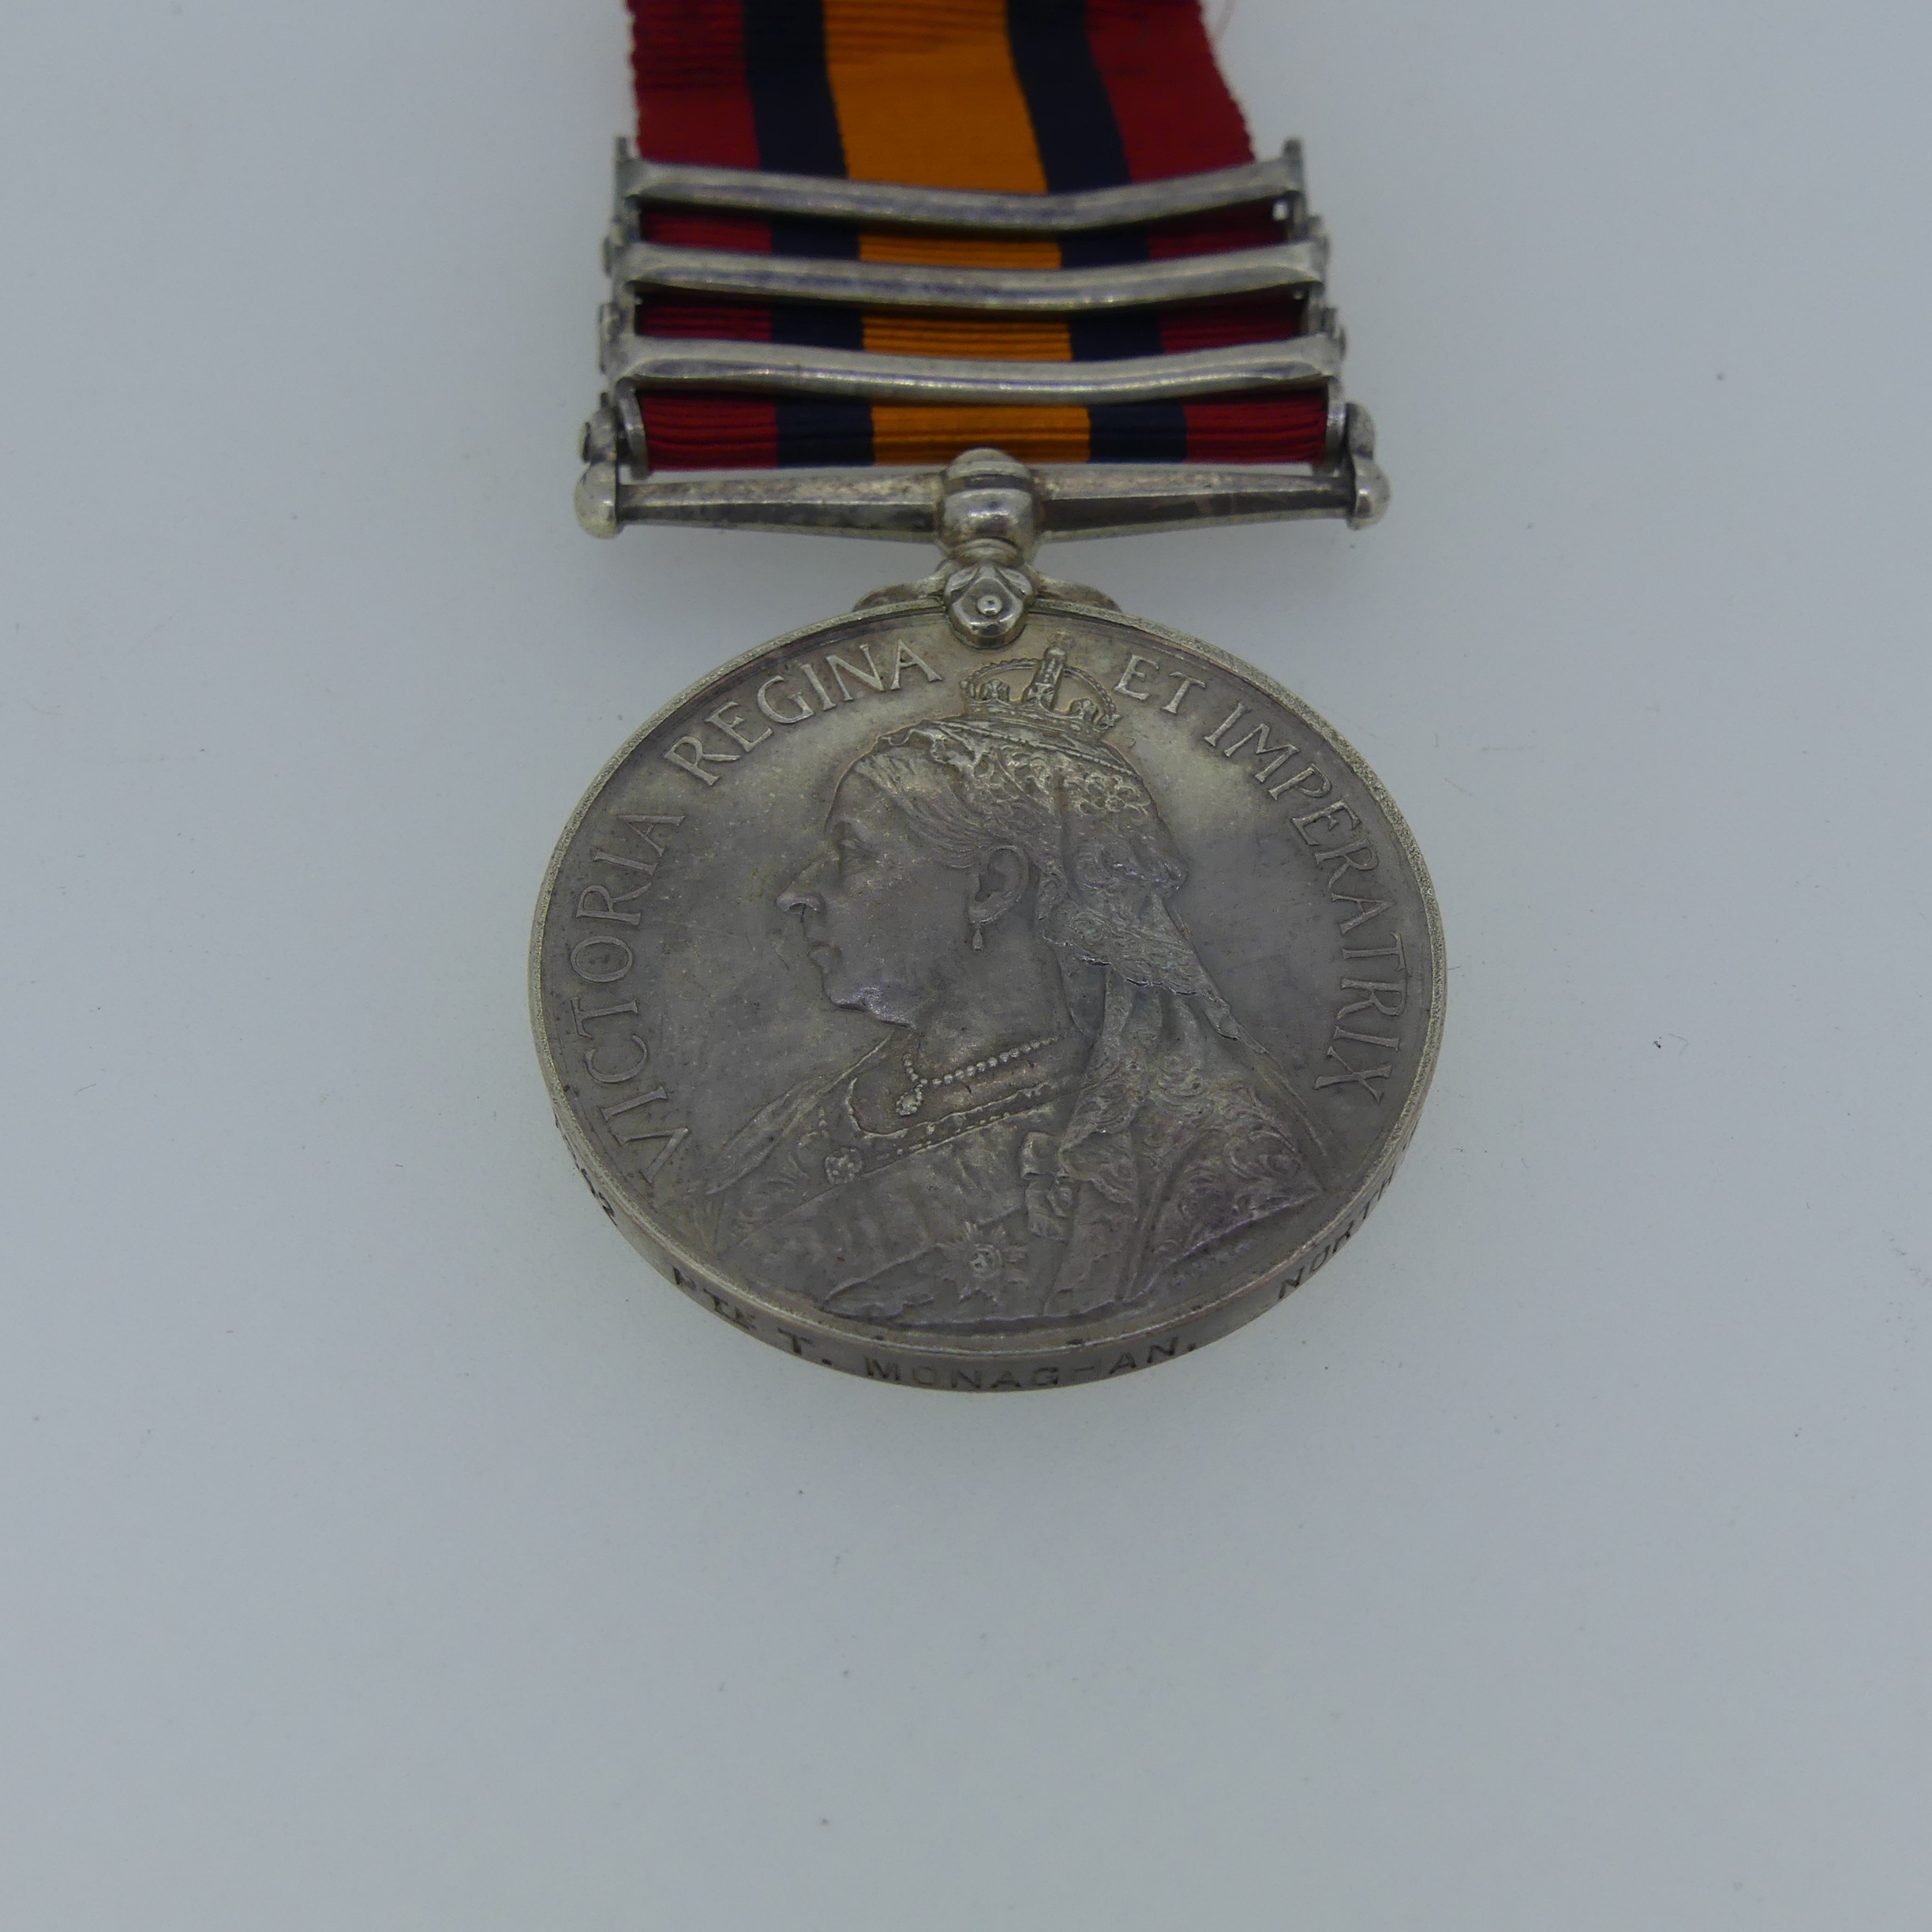 Queen's South Africa Medal (Three clasps: Transvaal, Orange Free State, Cape Colony) 6842 Pte T. - Image 3 of 5